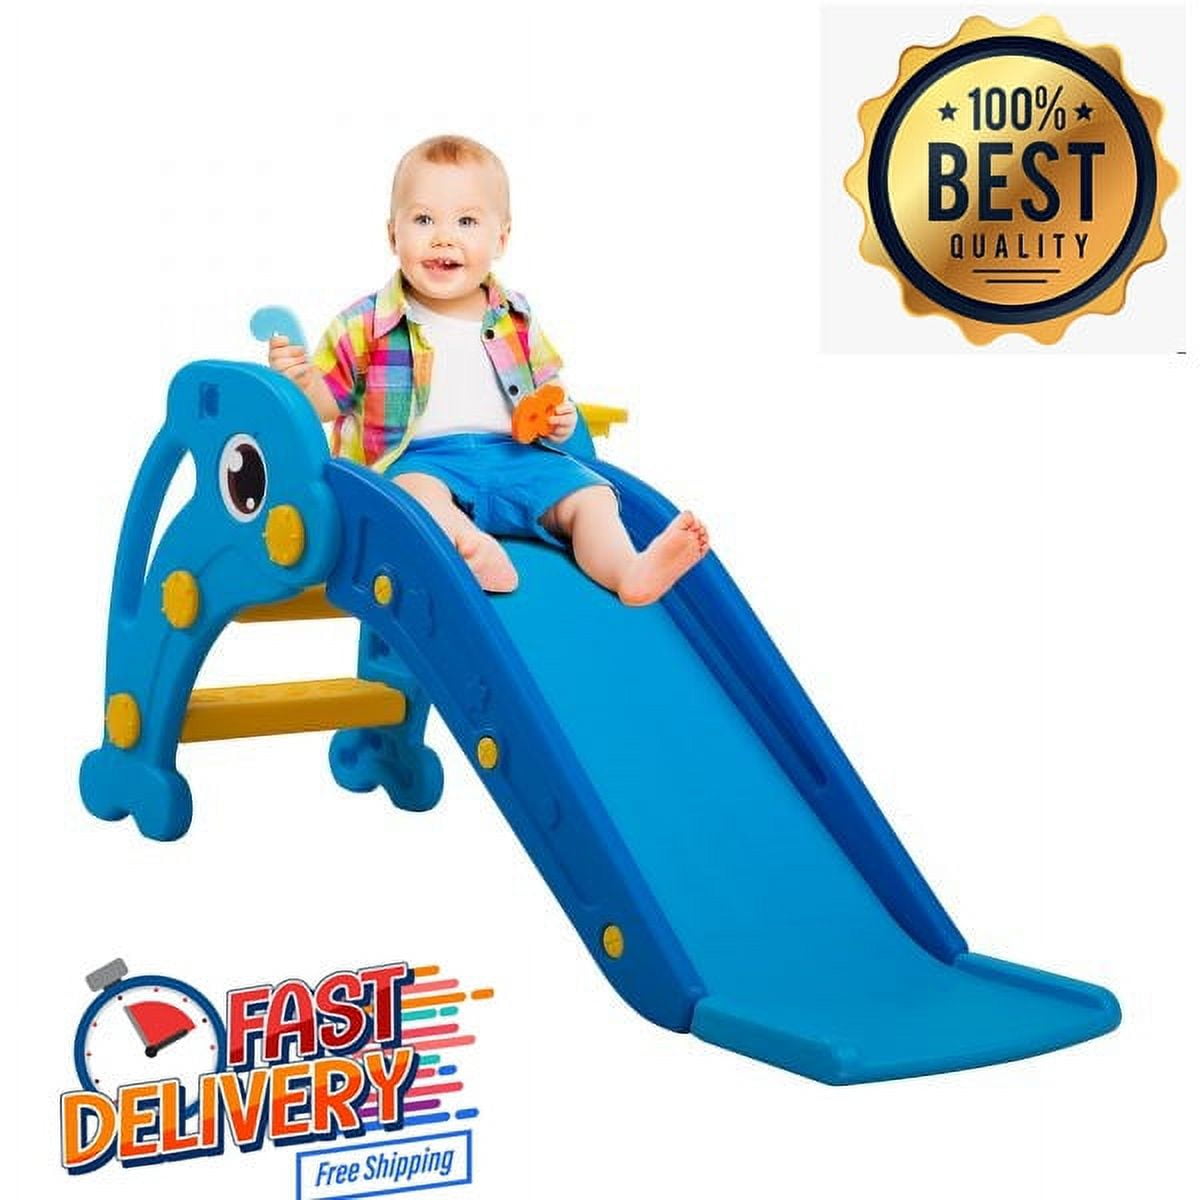 Kids-gift! 3 in 1 Kids Climber and Slide, Toddler Play Set with ...